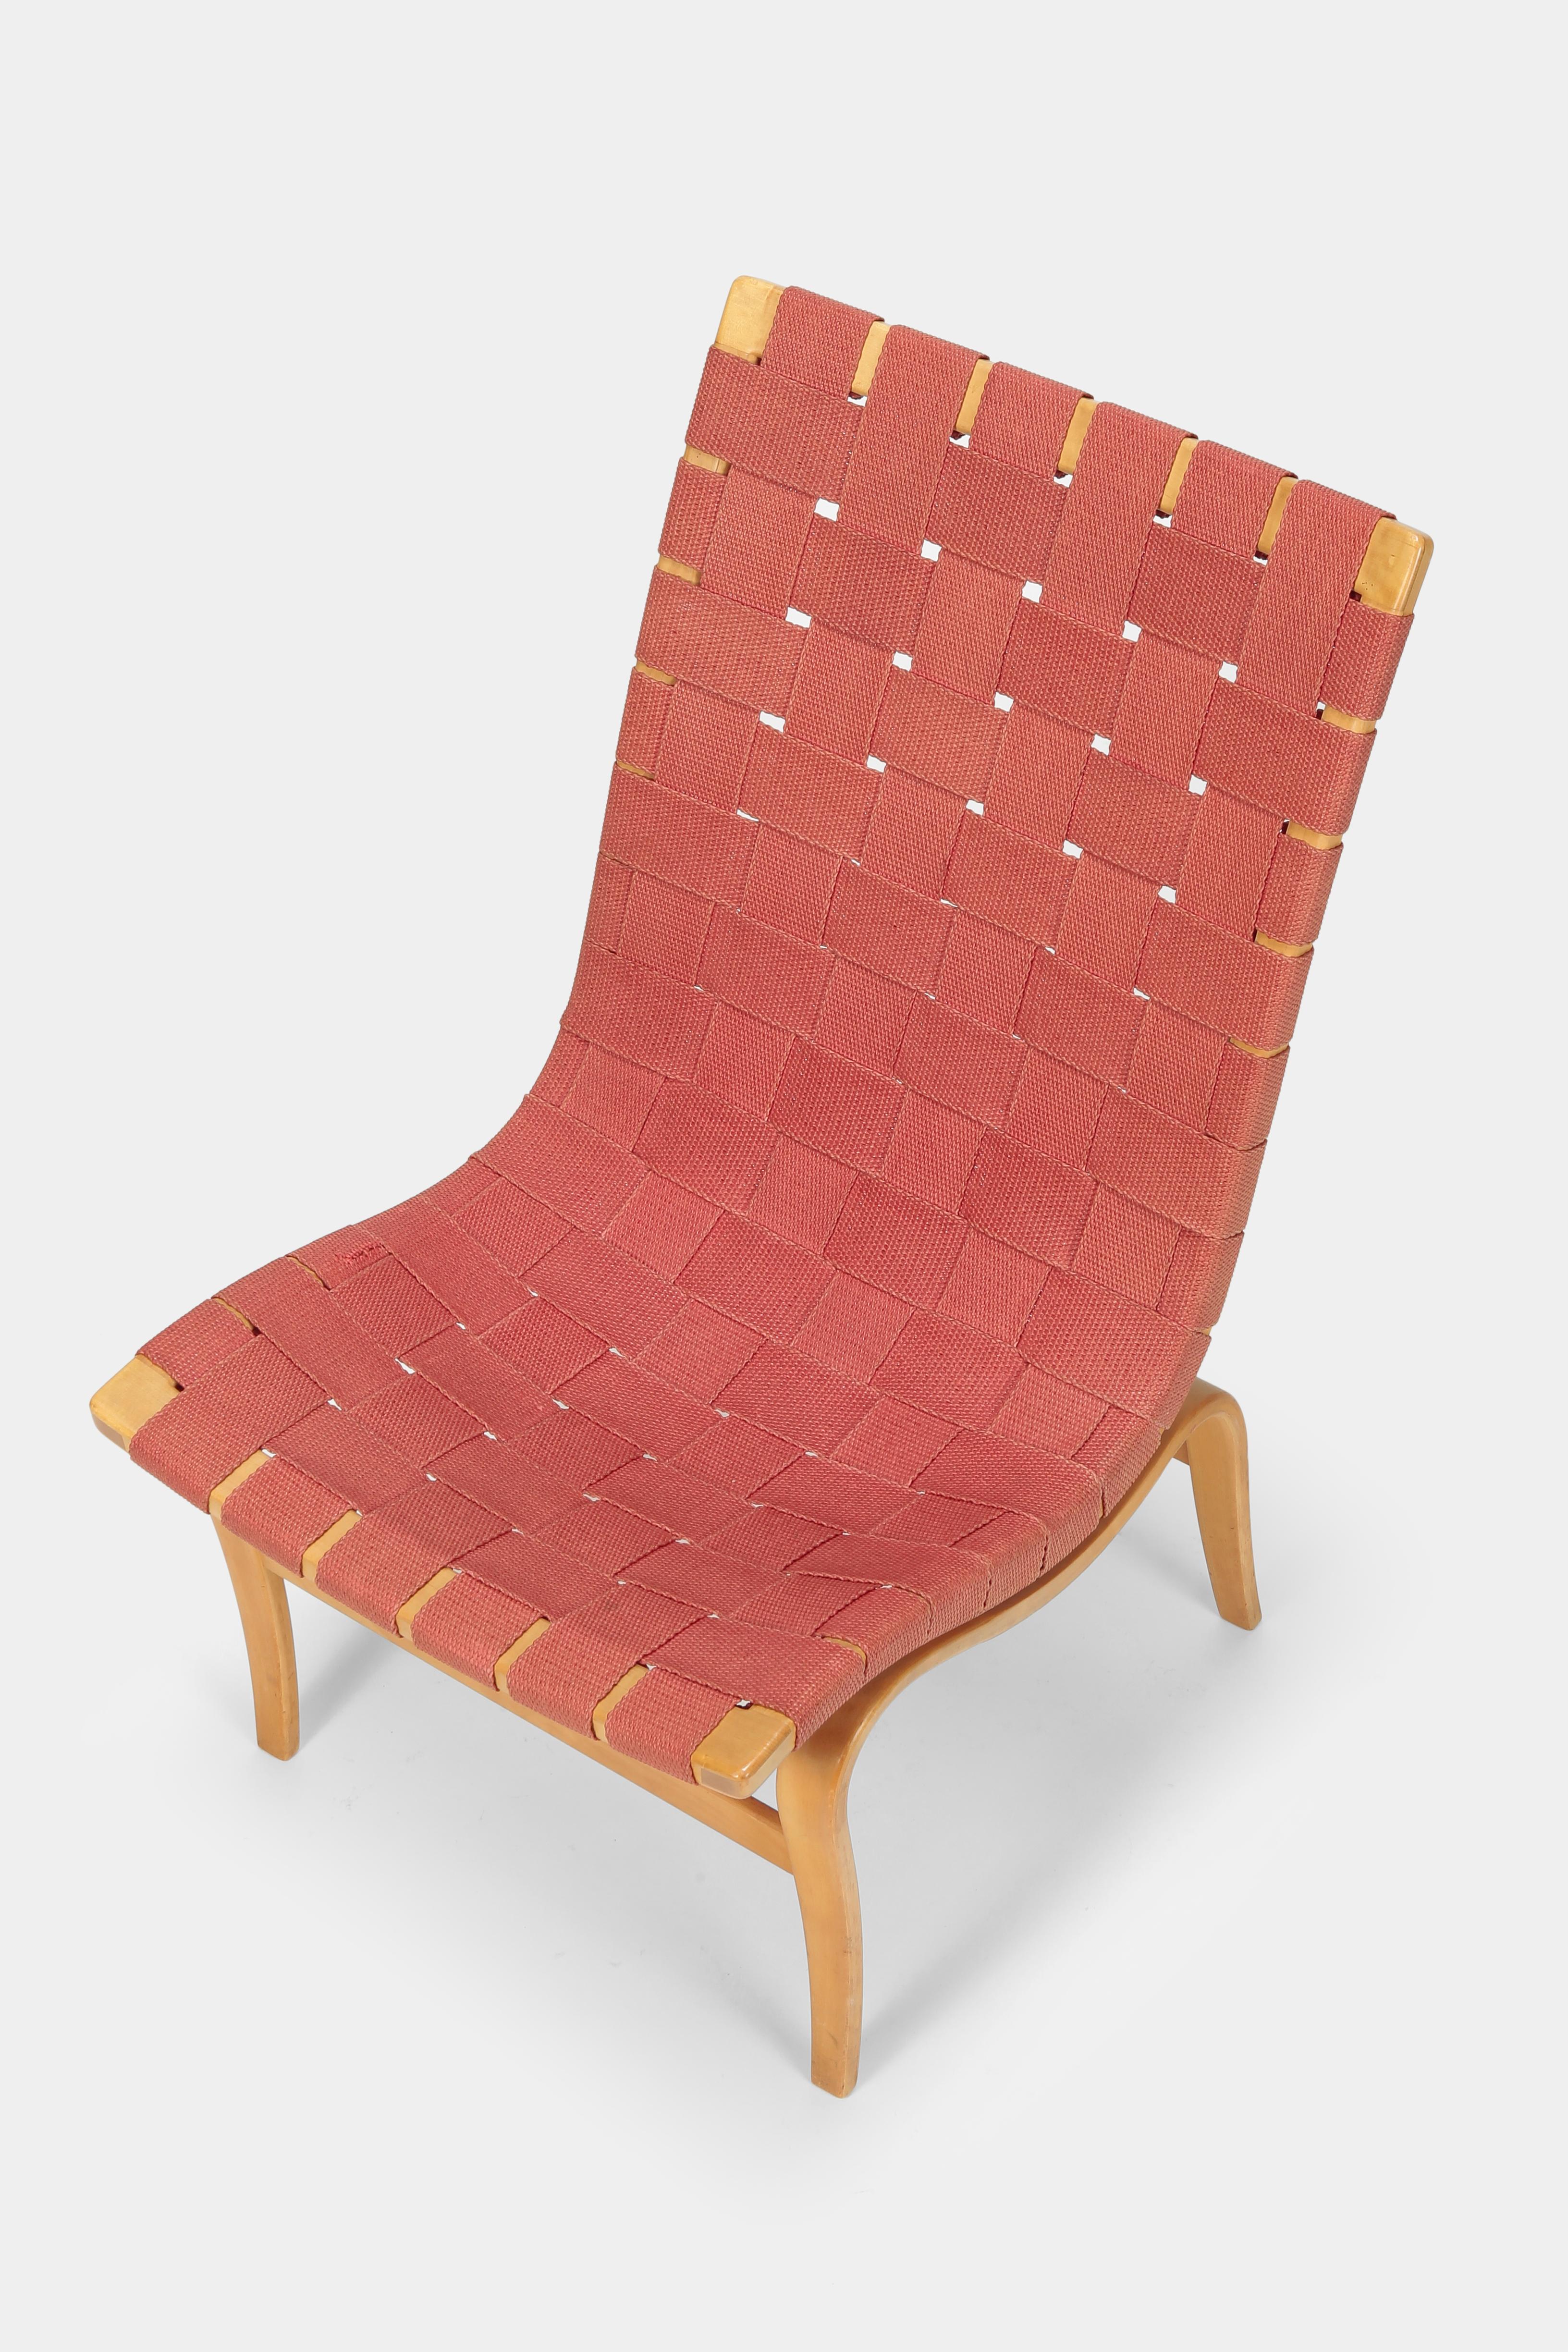 Bruno Mathsson, ‘Eva’ armchair, manufactured by the Mathsson Company in the 1940s. The original braided seat is made of a special tear-resistant paper without owing to the shortage of hemp during the war. With original stamp. Very nice vintage